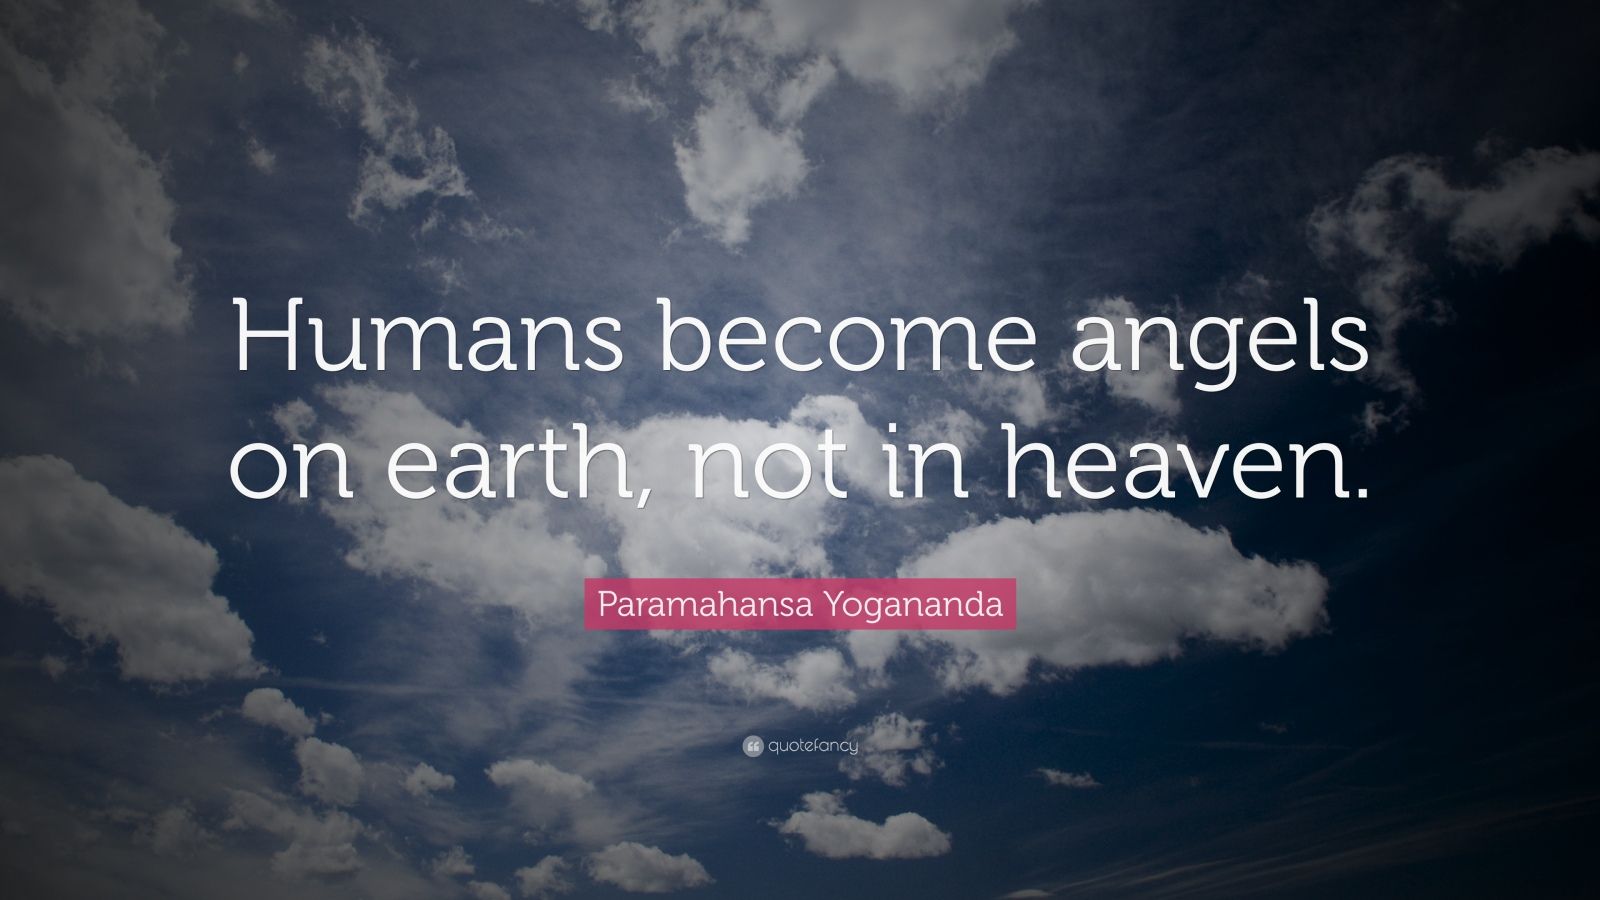 64642 Paramahansa Yogananda Quote Humans become angels on earth not in